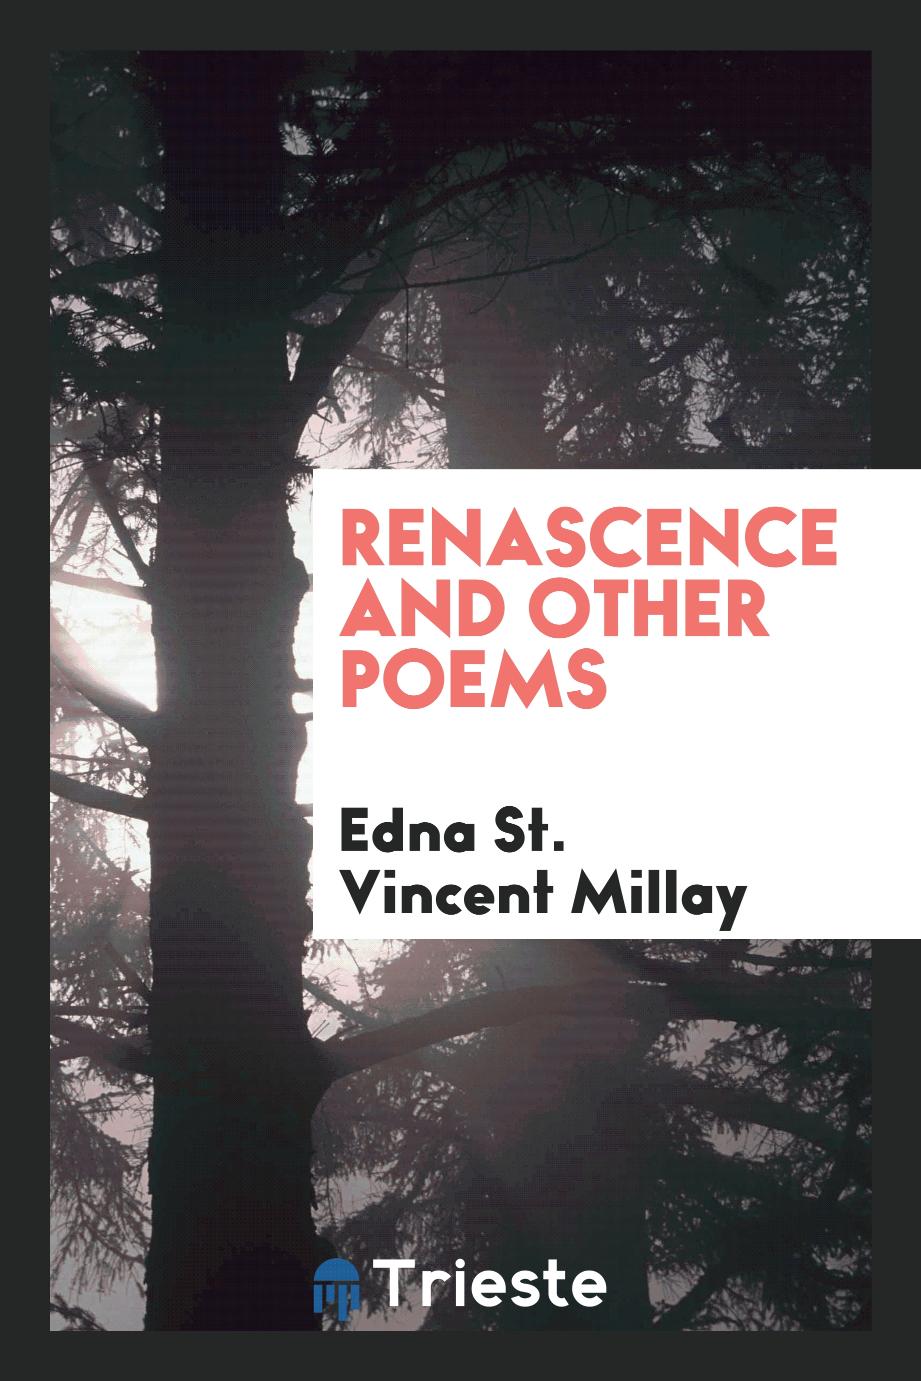 Edna St. Vincent Millay - Renascence and other poems